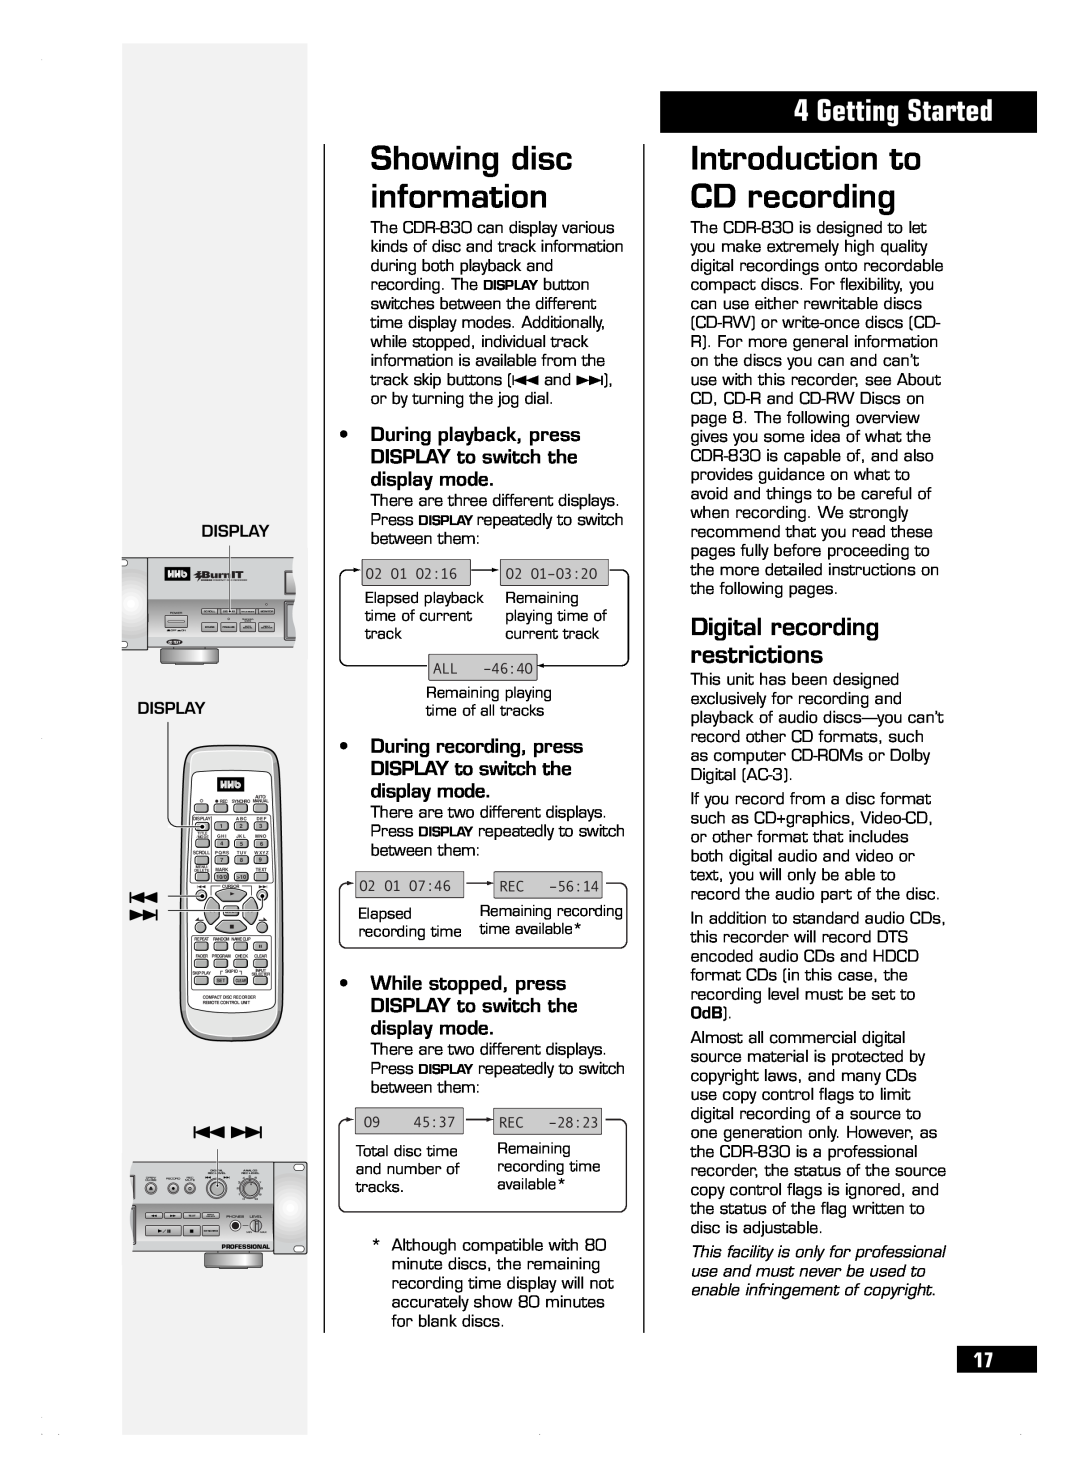 HHB comm CDR 830 Showing disc information, Introduction to CD recording, Digital recording restrictions, display mode 